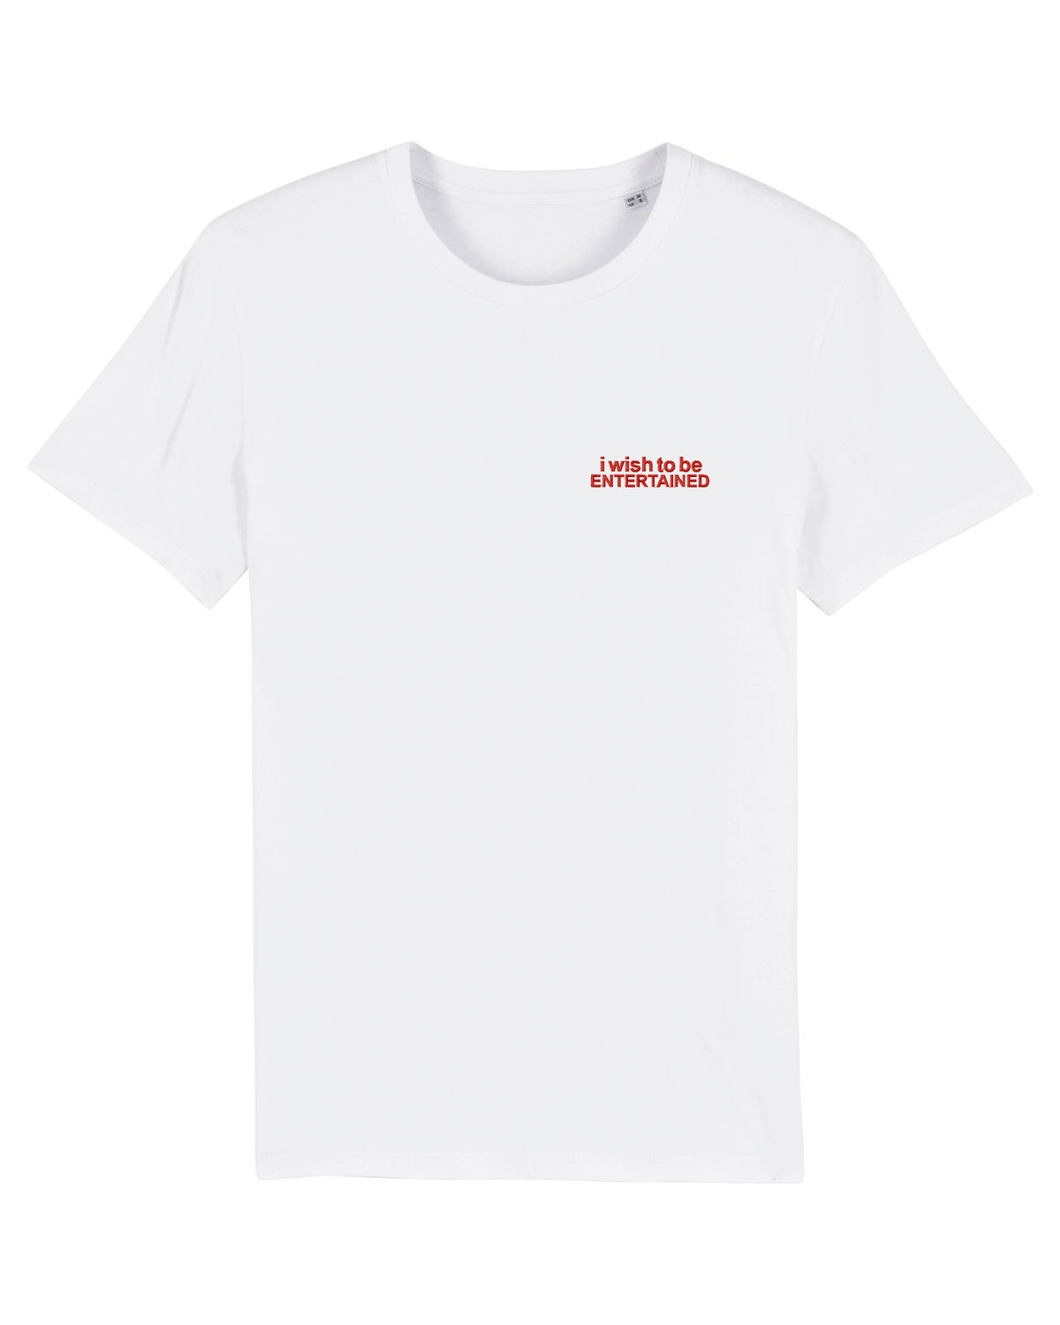 Entertained - T-Shirt - White